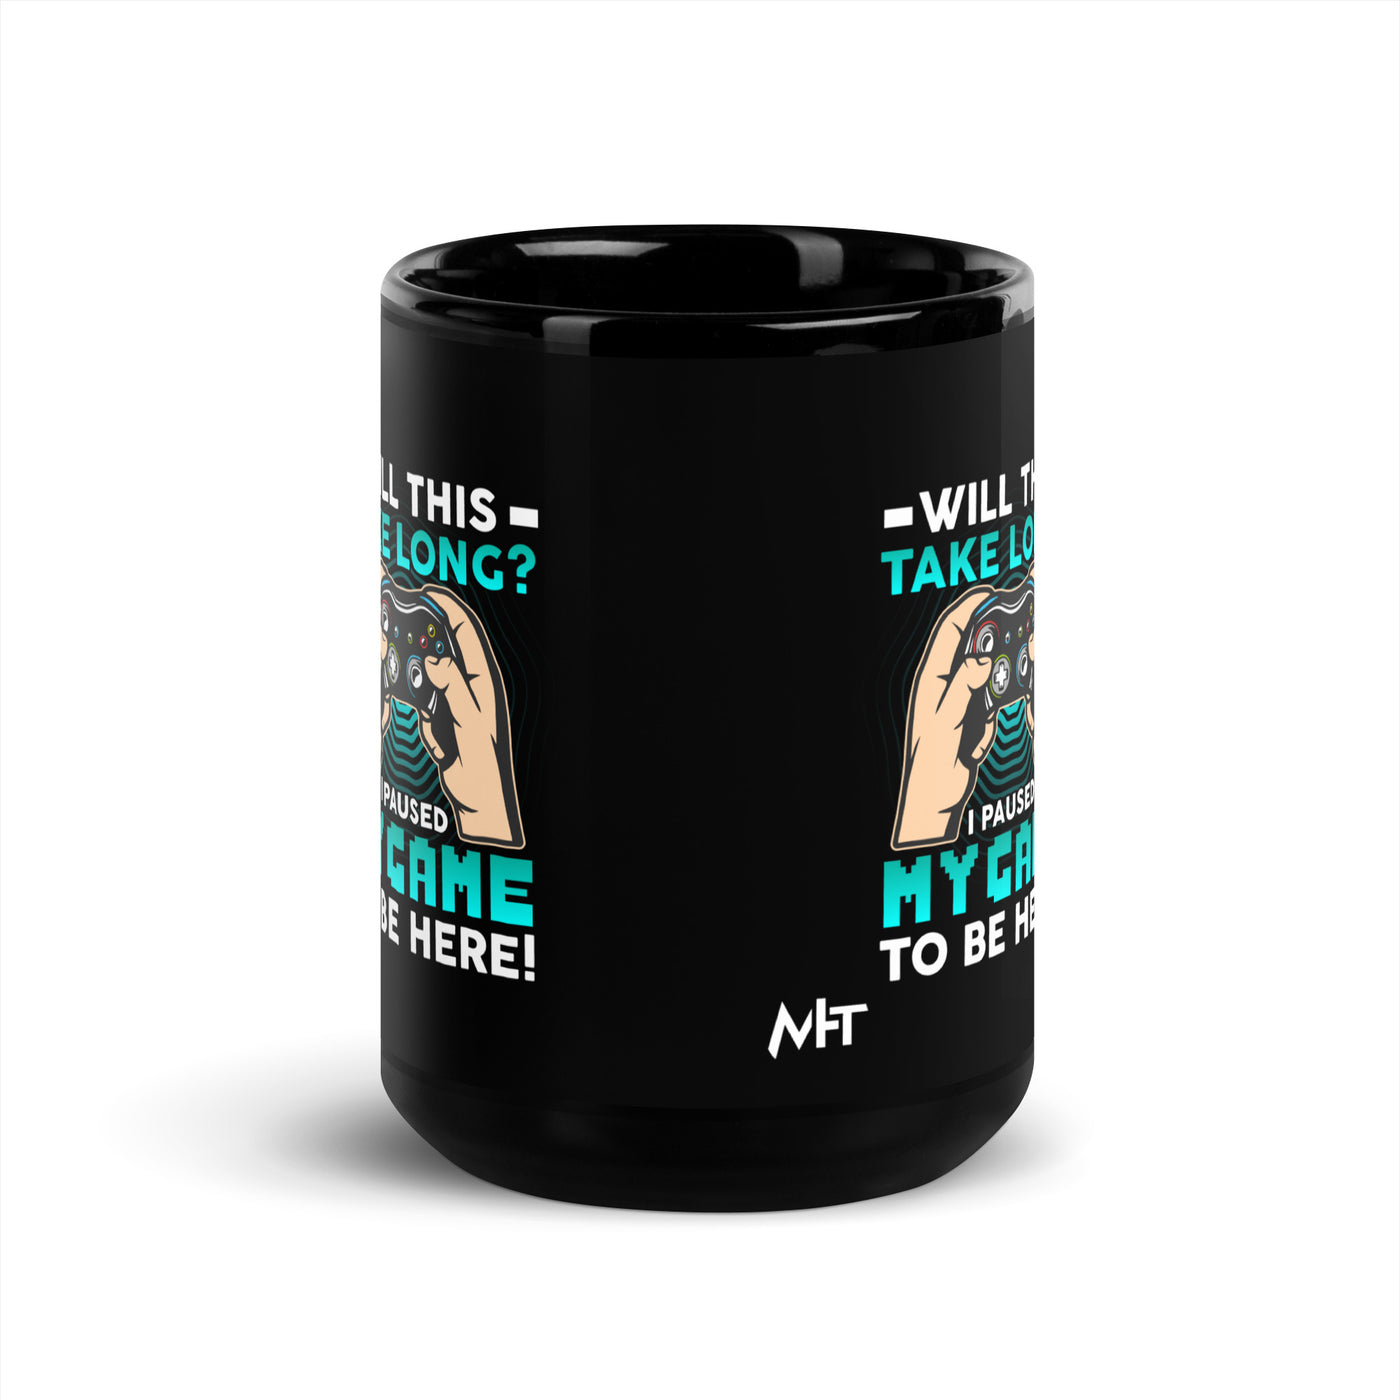 Will this take long, I paused my game to be here - Black Glossy Mug